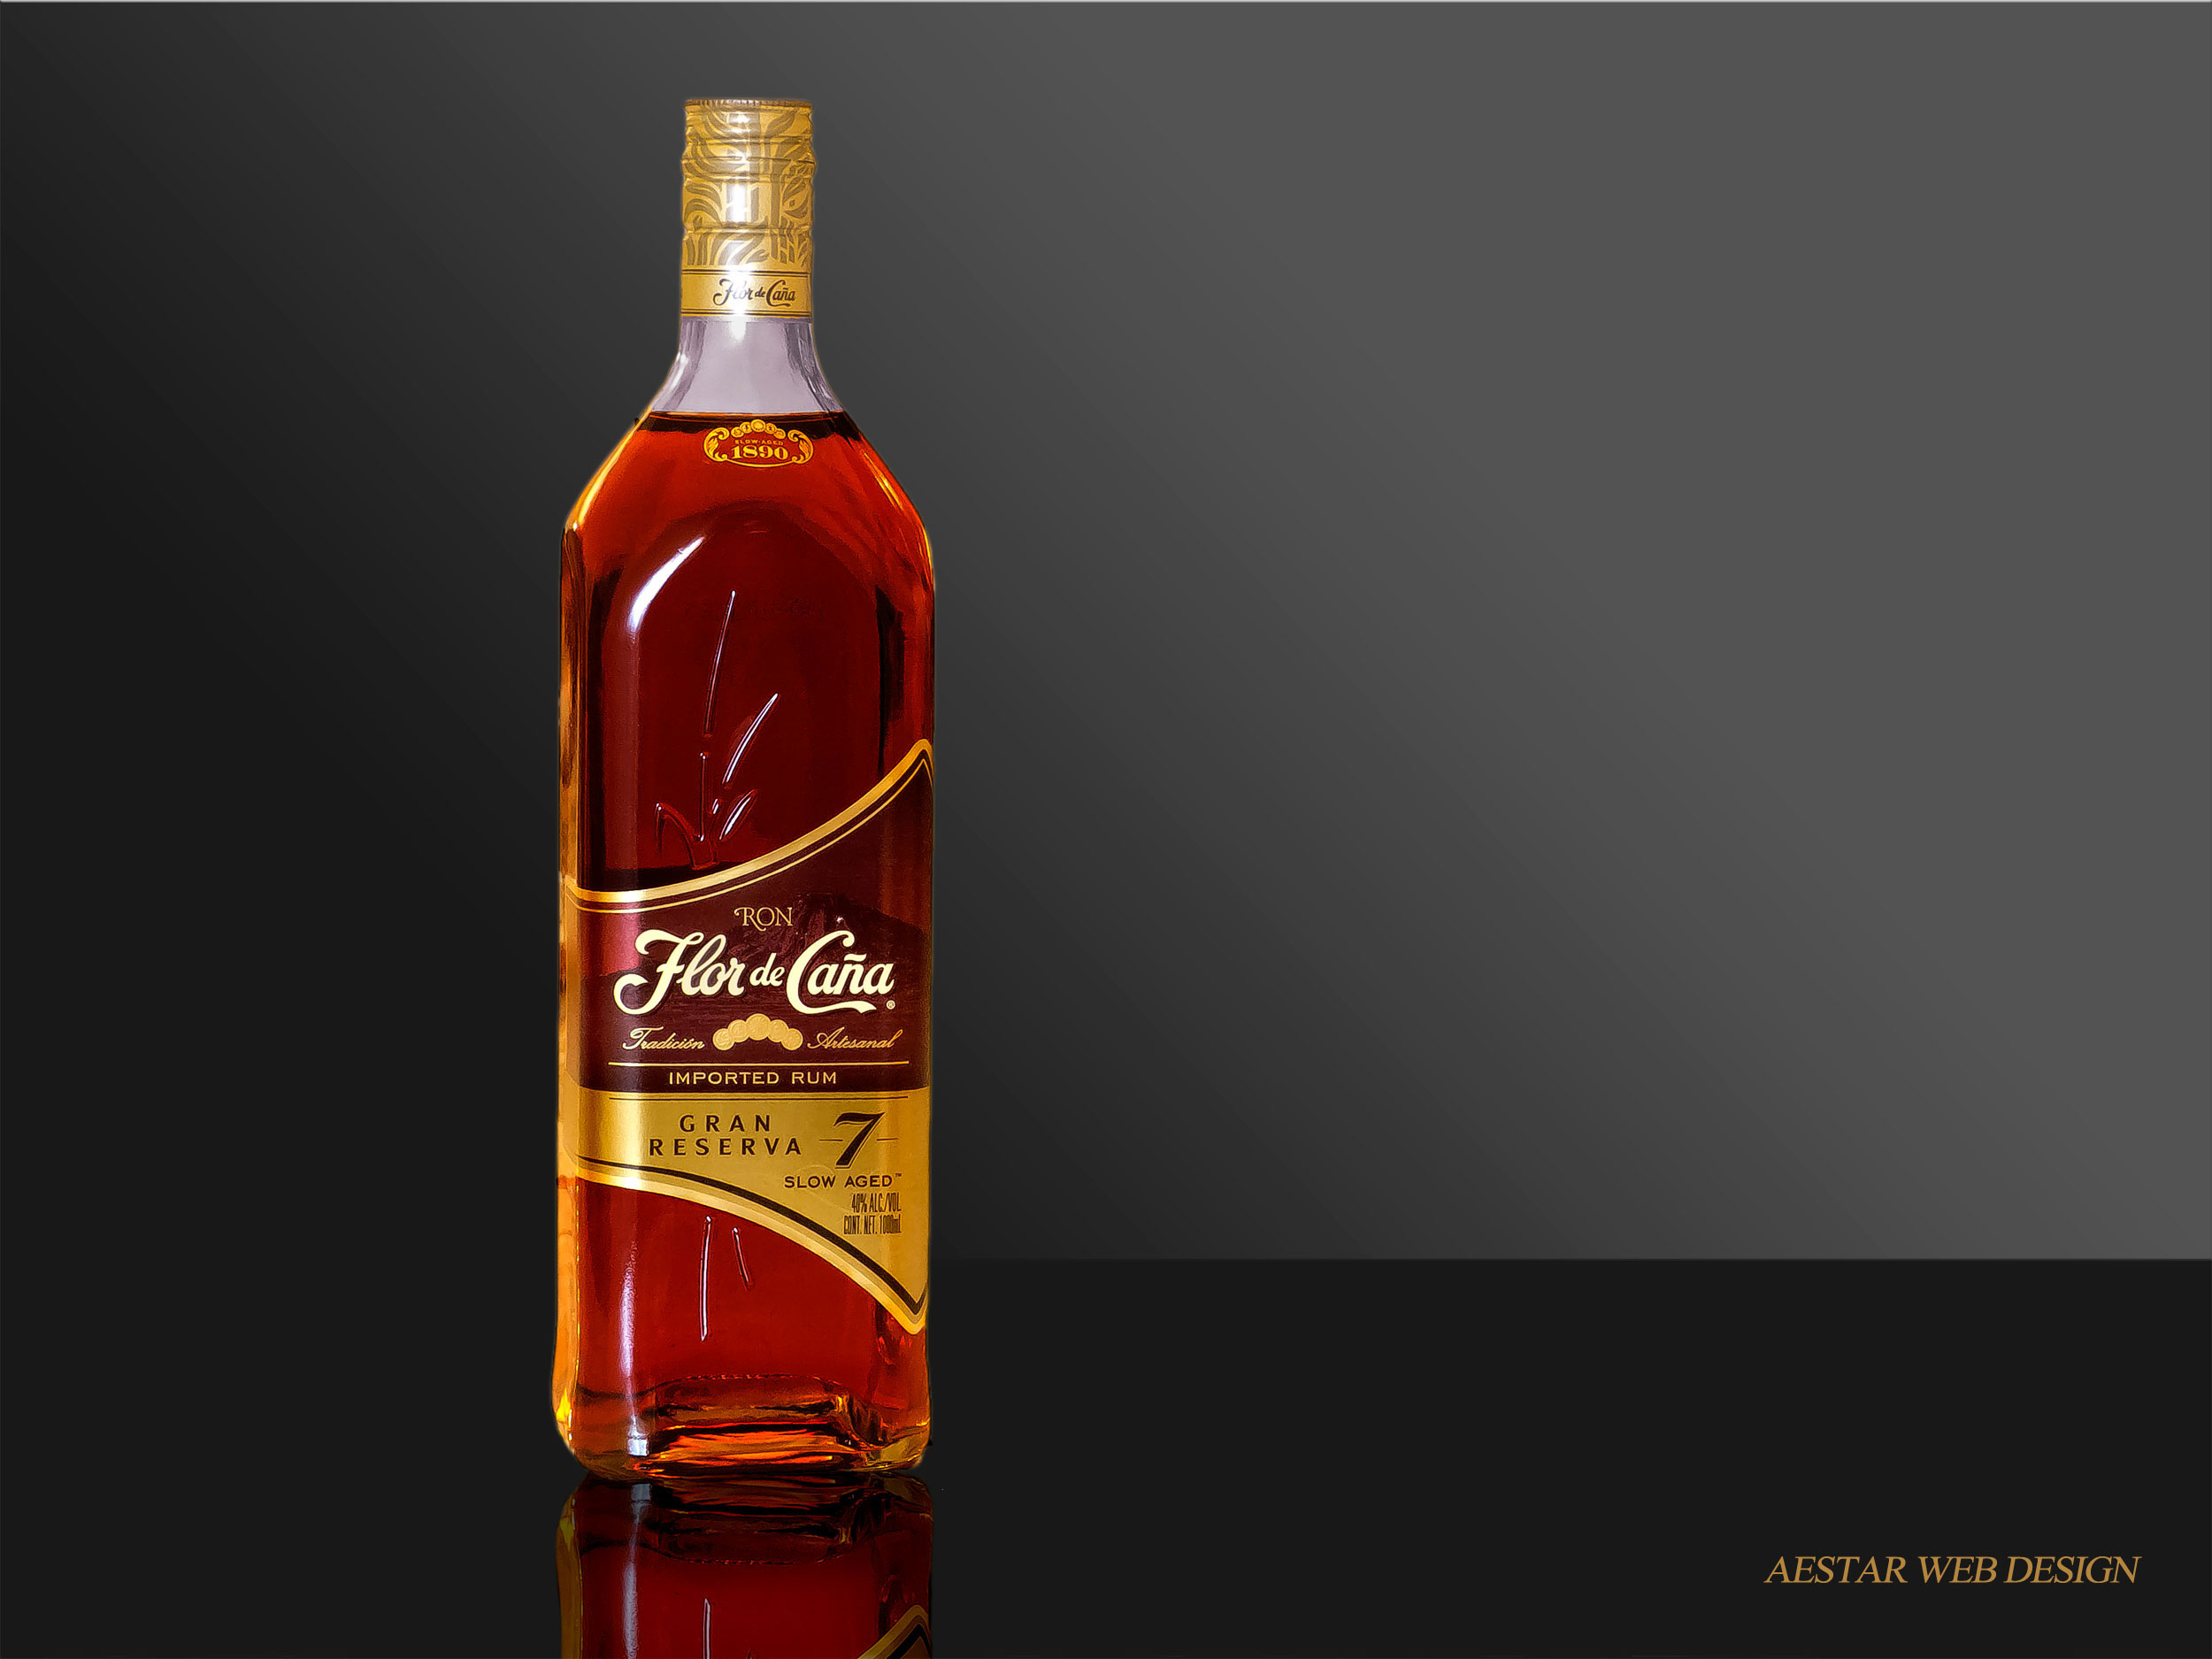 Web Product Photography, Beverages, Bottle of Rum, New York City